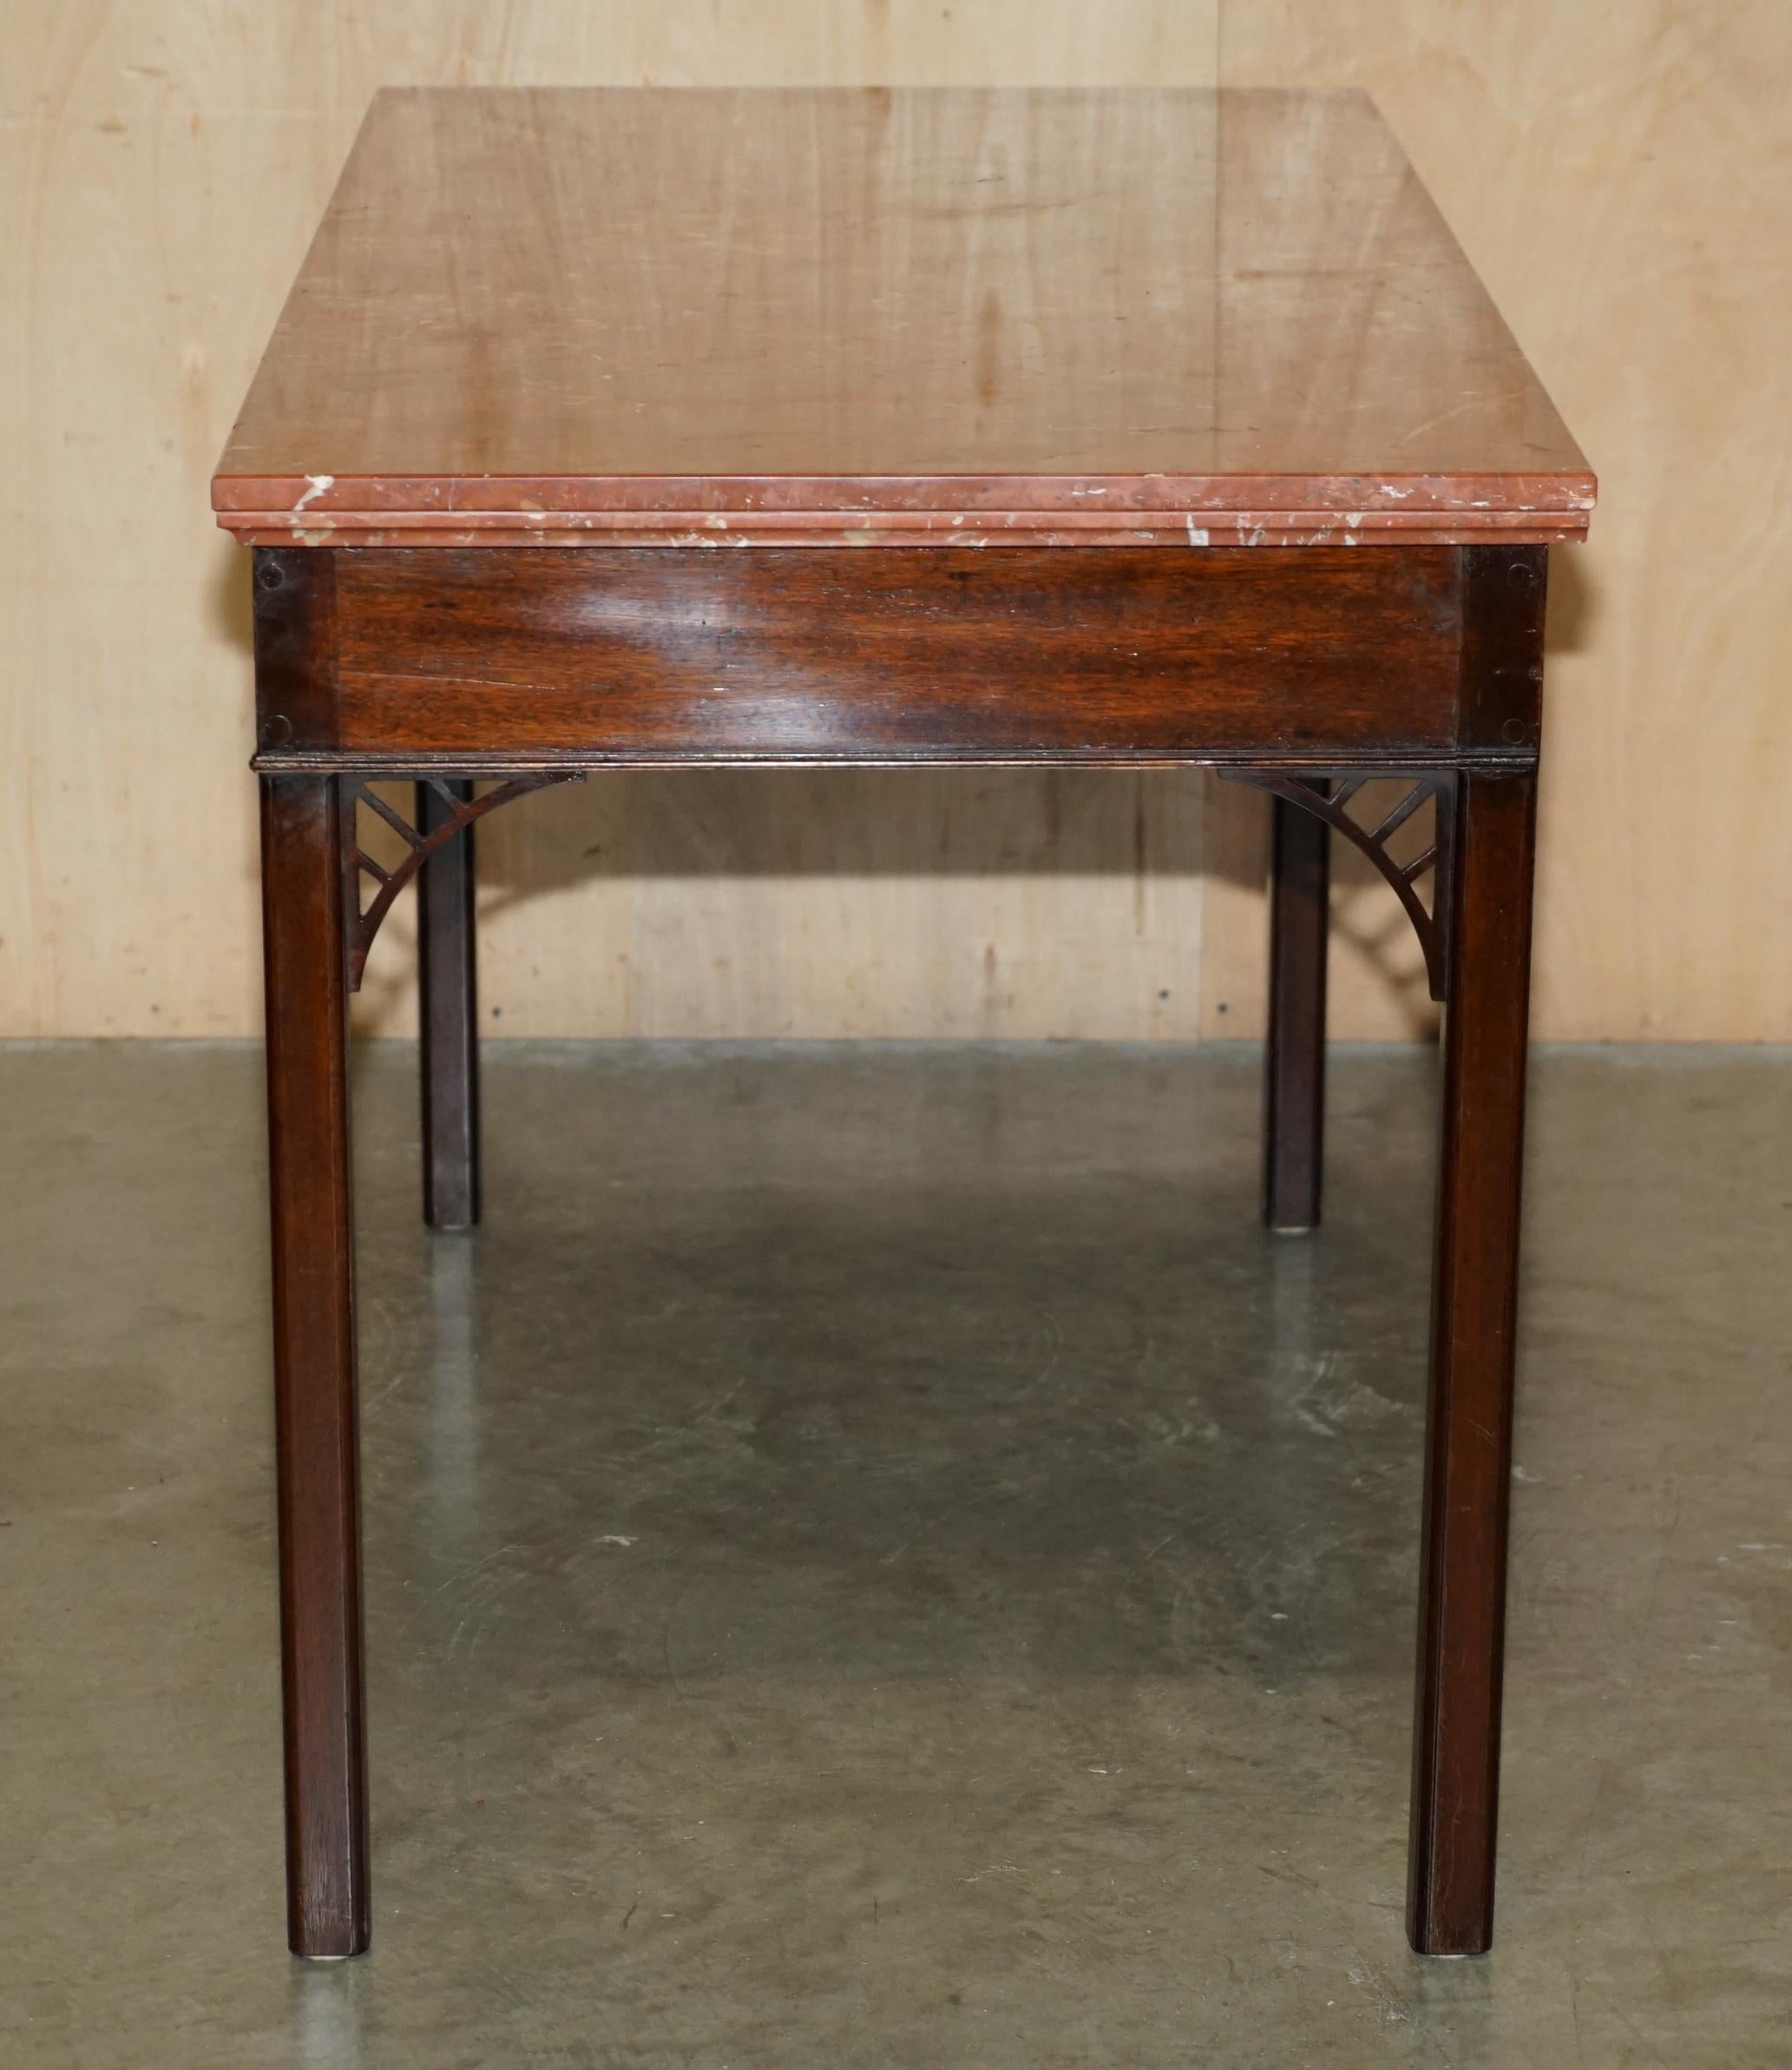 ANTIQUE CIRCA 1860 LARGE THOMAS CHIPPENDALE MARBLE TOP WRiTING OR HALL TABLE im Angebot 10